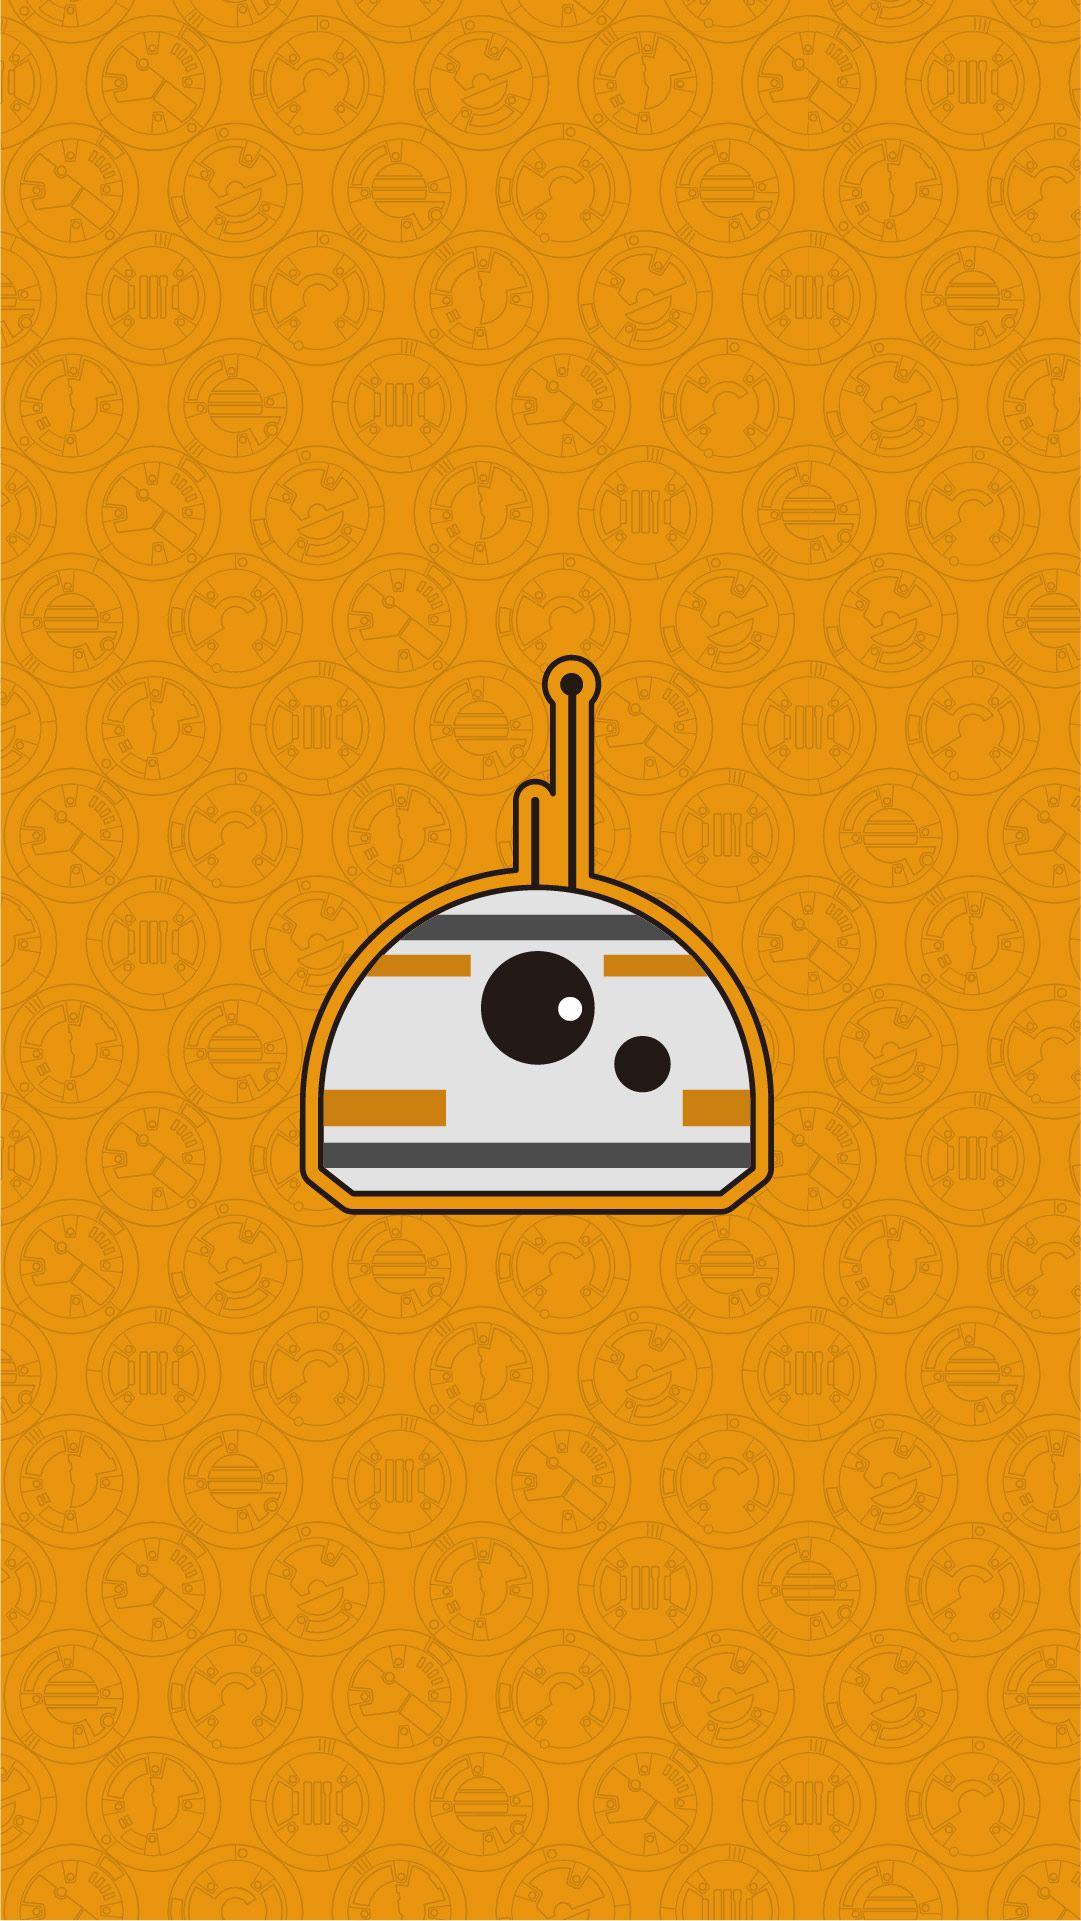 Star Wars BB8 wallpaper for iPhone and Android devices. - Star Wars